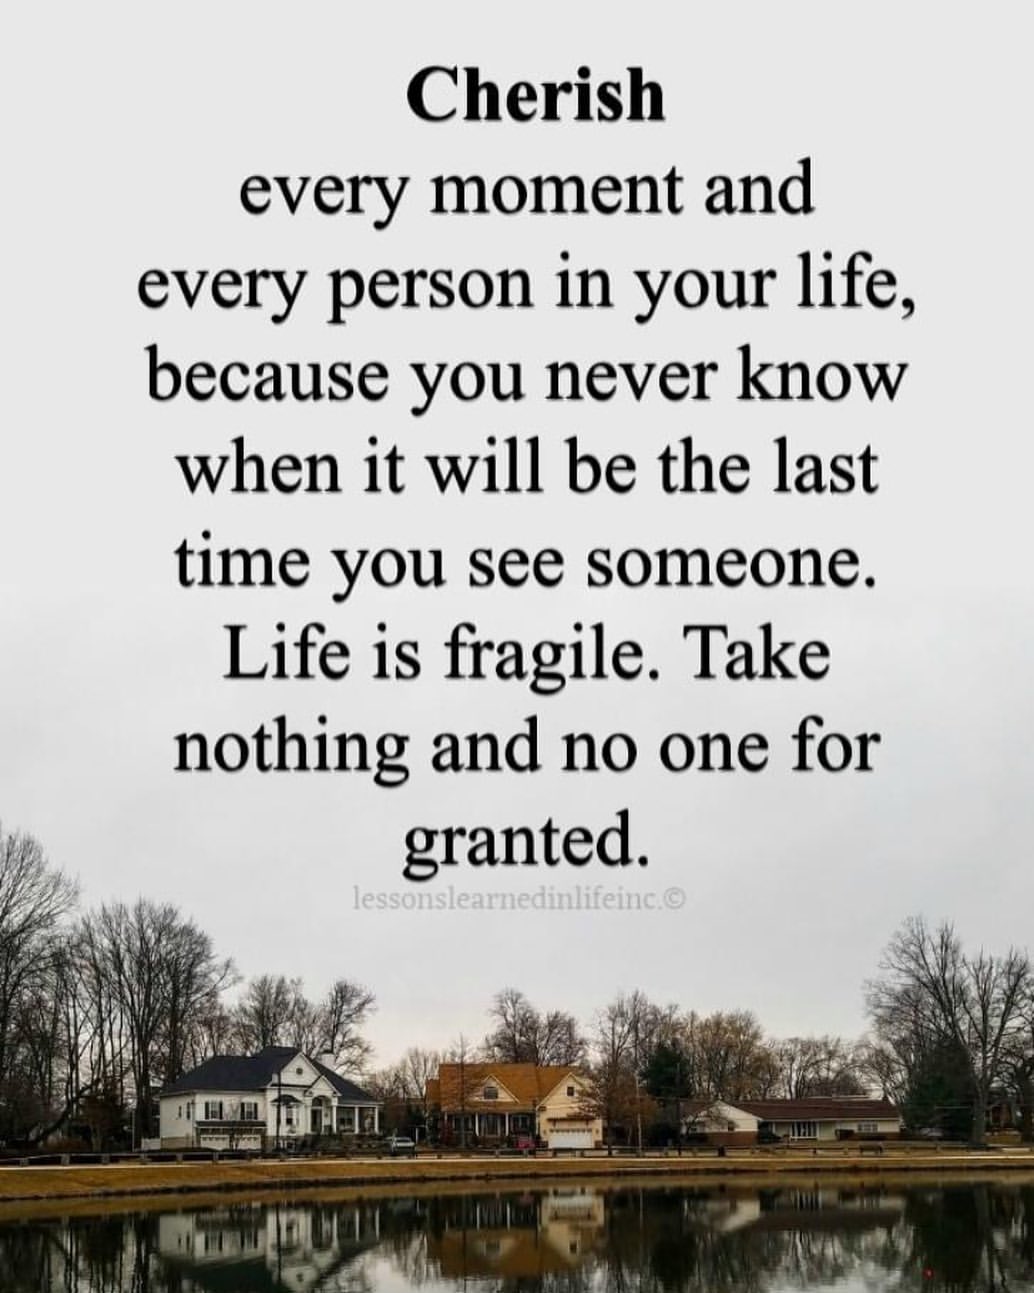 Cherish every moment and every person in your life, because you never know when it will be the last time you see someone. Life is fragile. Take nothing and no one for granted.